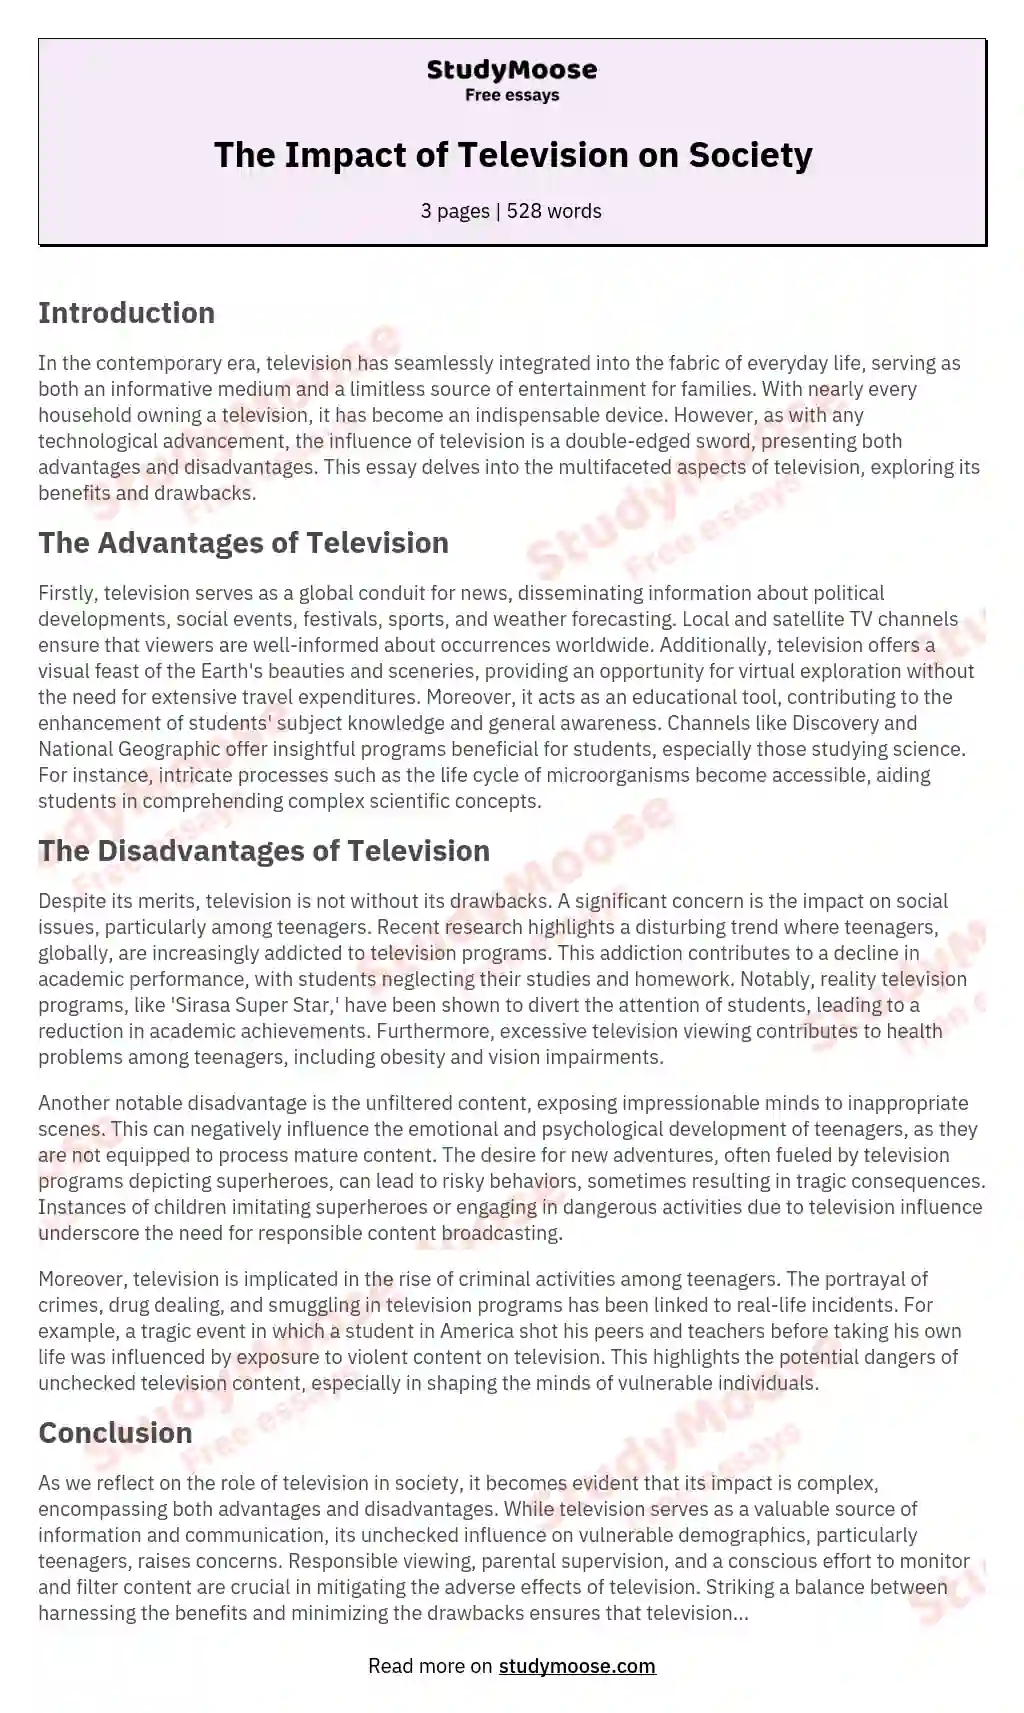 The Impact of Television on Society essay